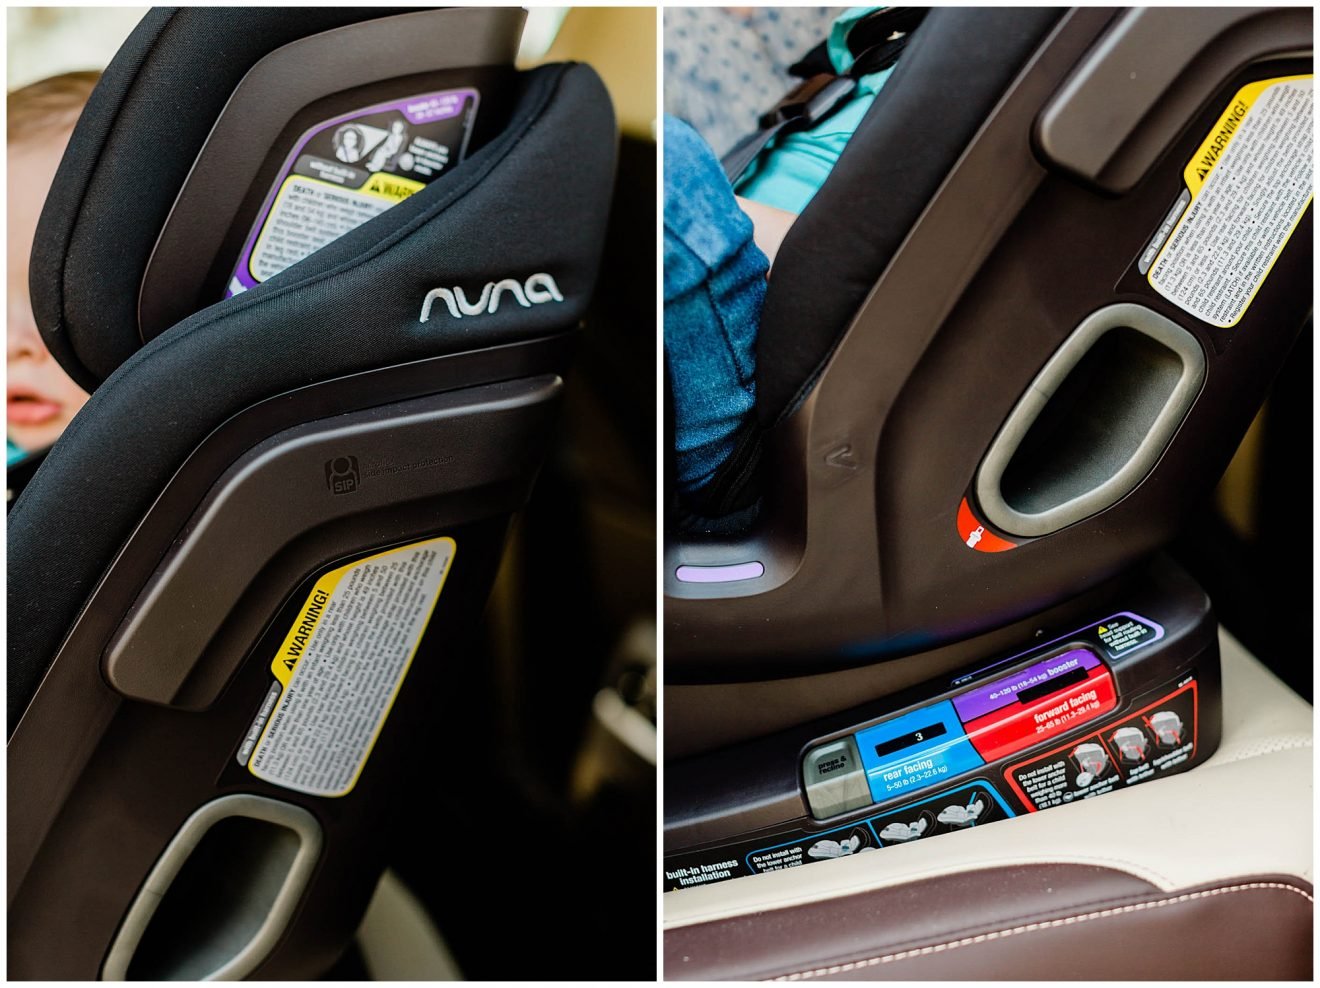 Close up looks of the sides of the Nuna Exec car seat